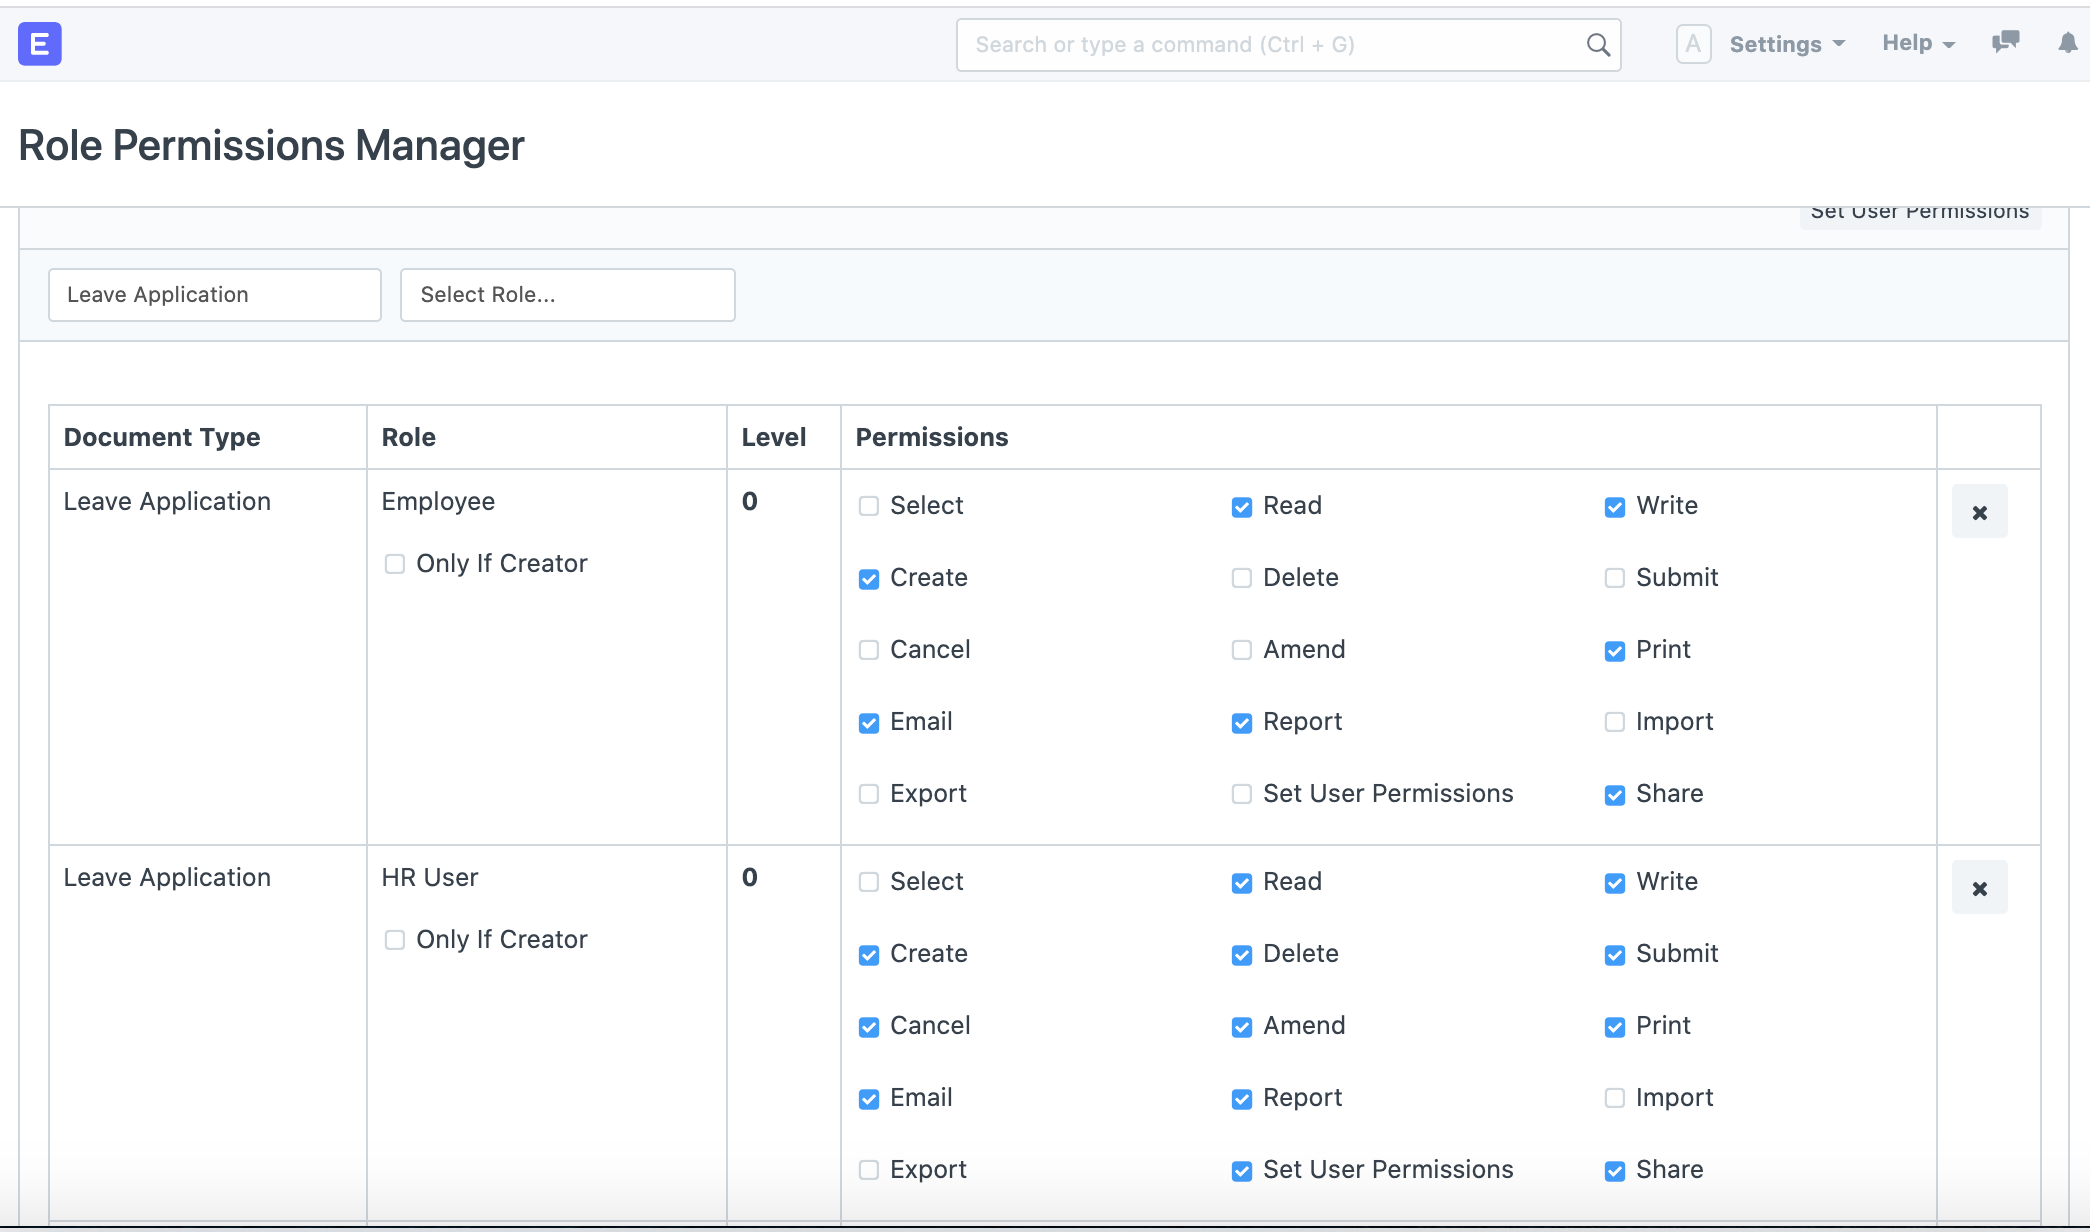 Manage Read, Write, Create, Submit, Amend access using the Role Permissions Manager